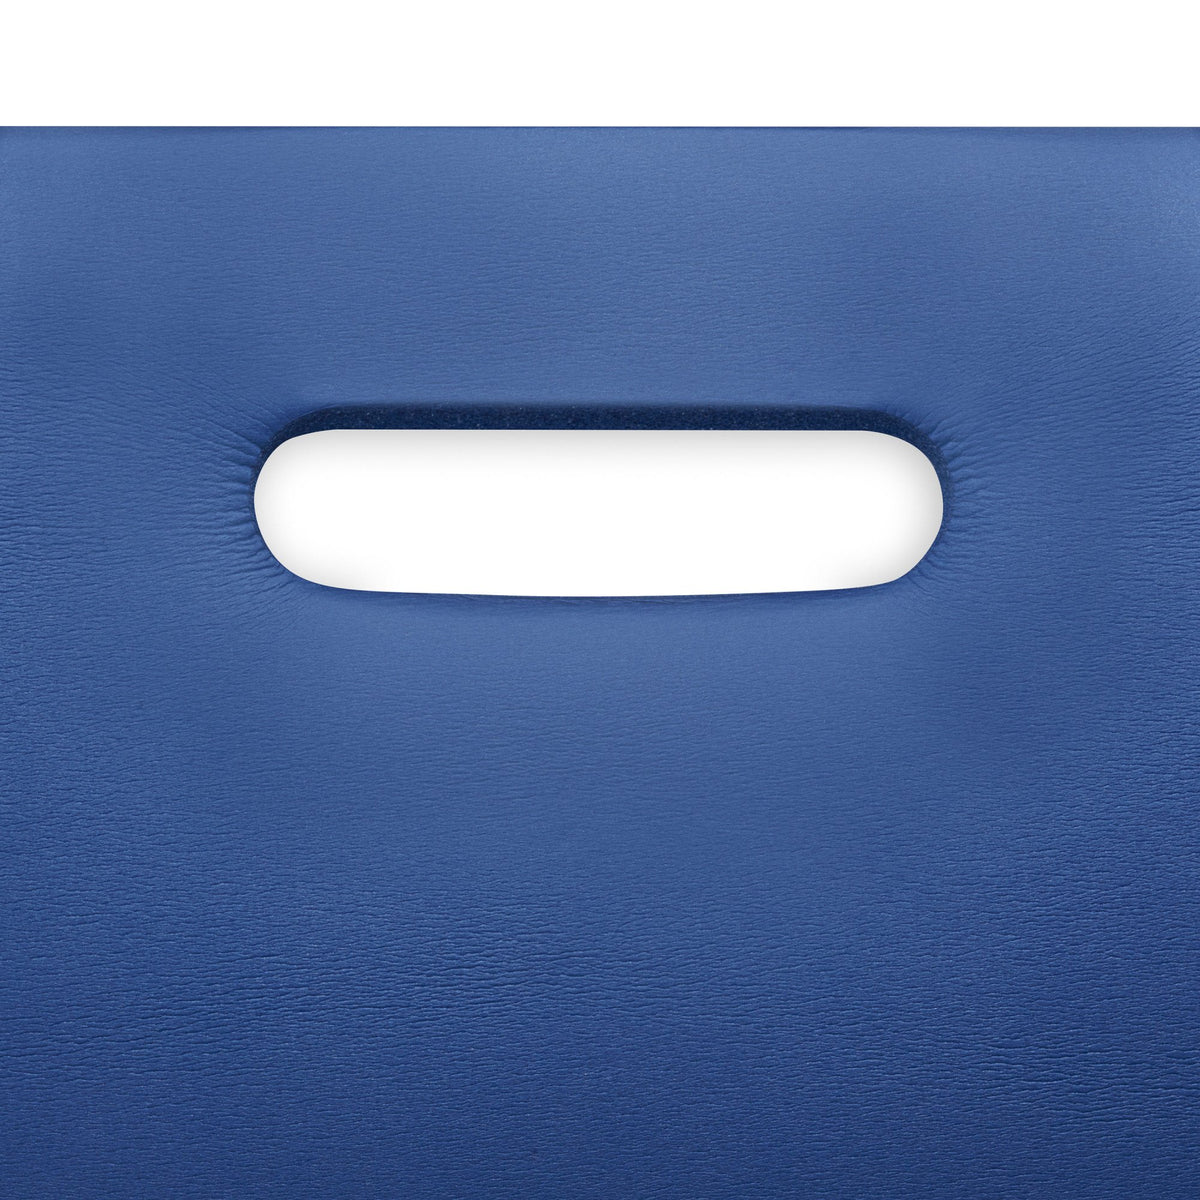 Handle of the blue SPRI Exercise Mat